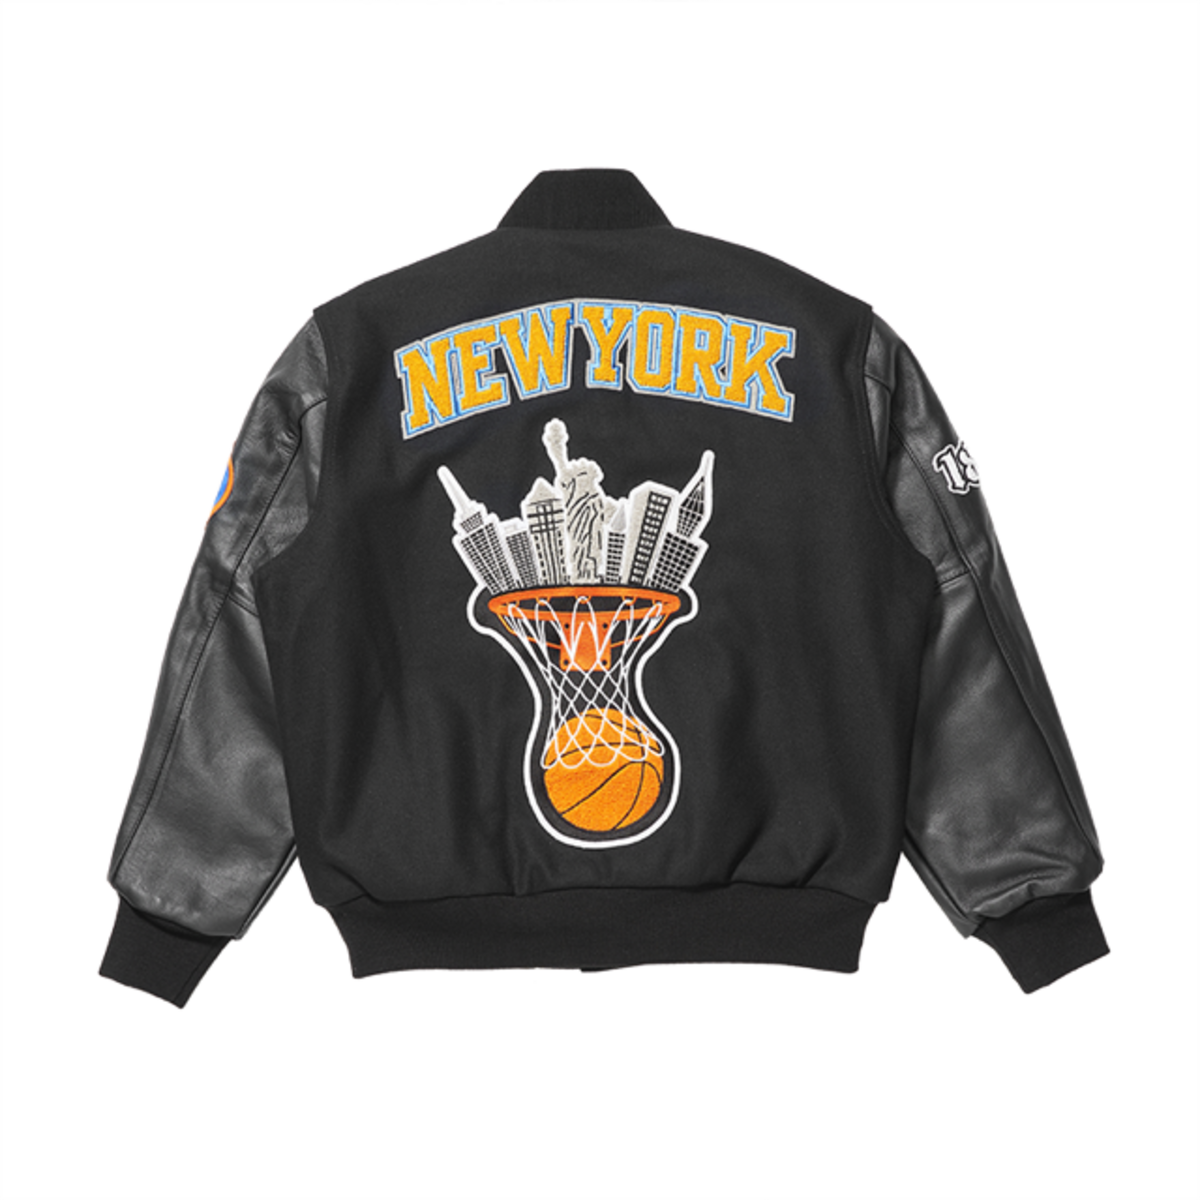 New York Nico Teams Up With Knicks and 1800 Tequila for Varsity Jacket ...